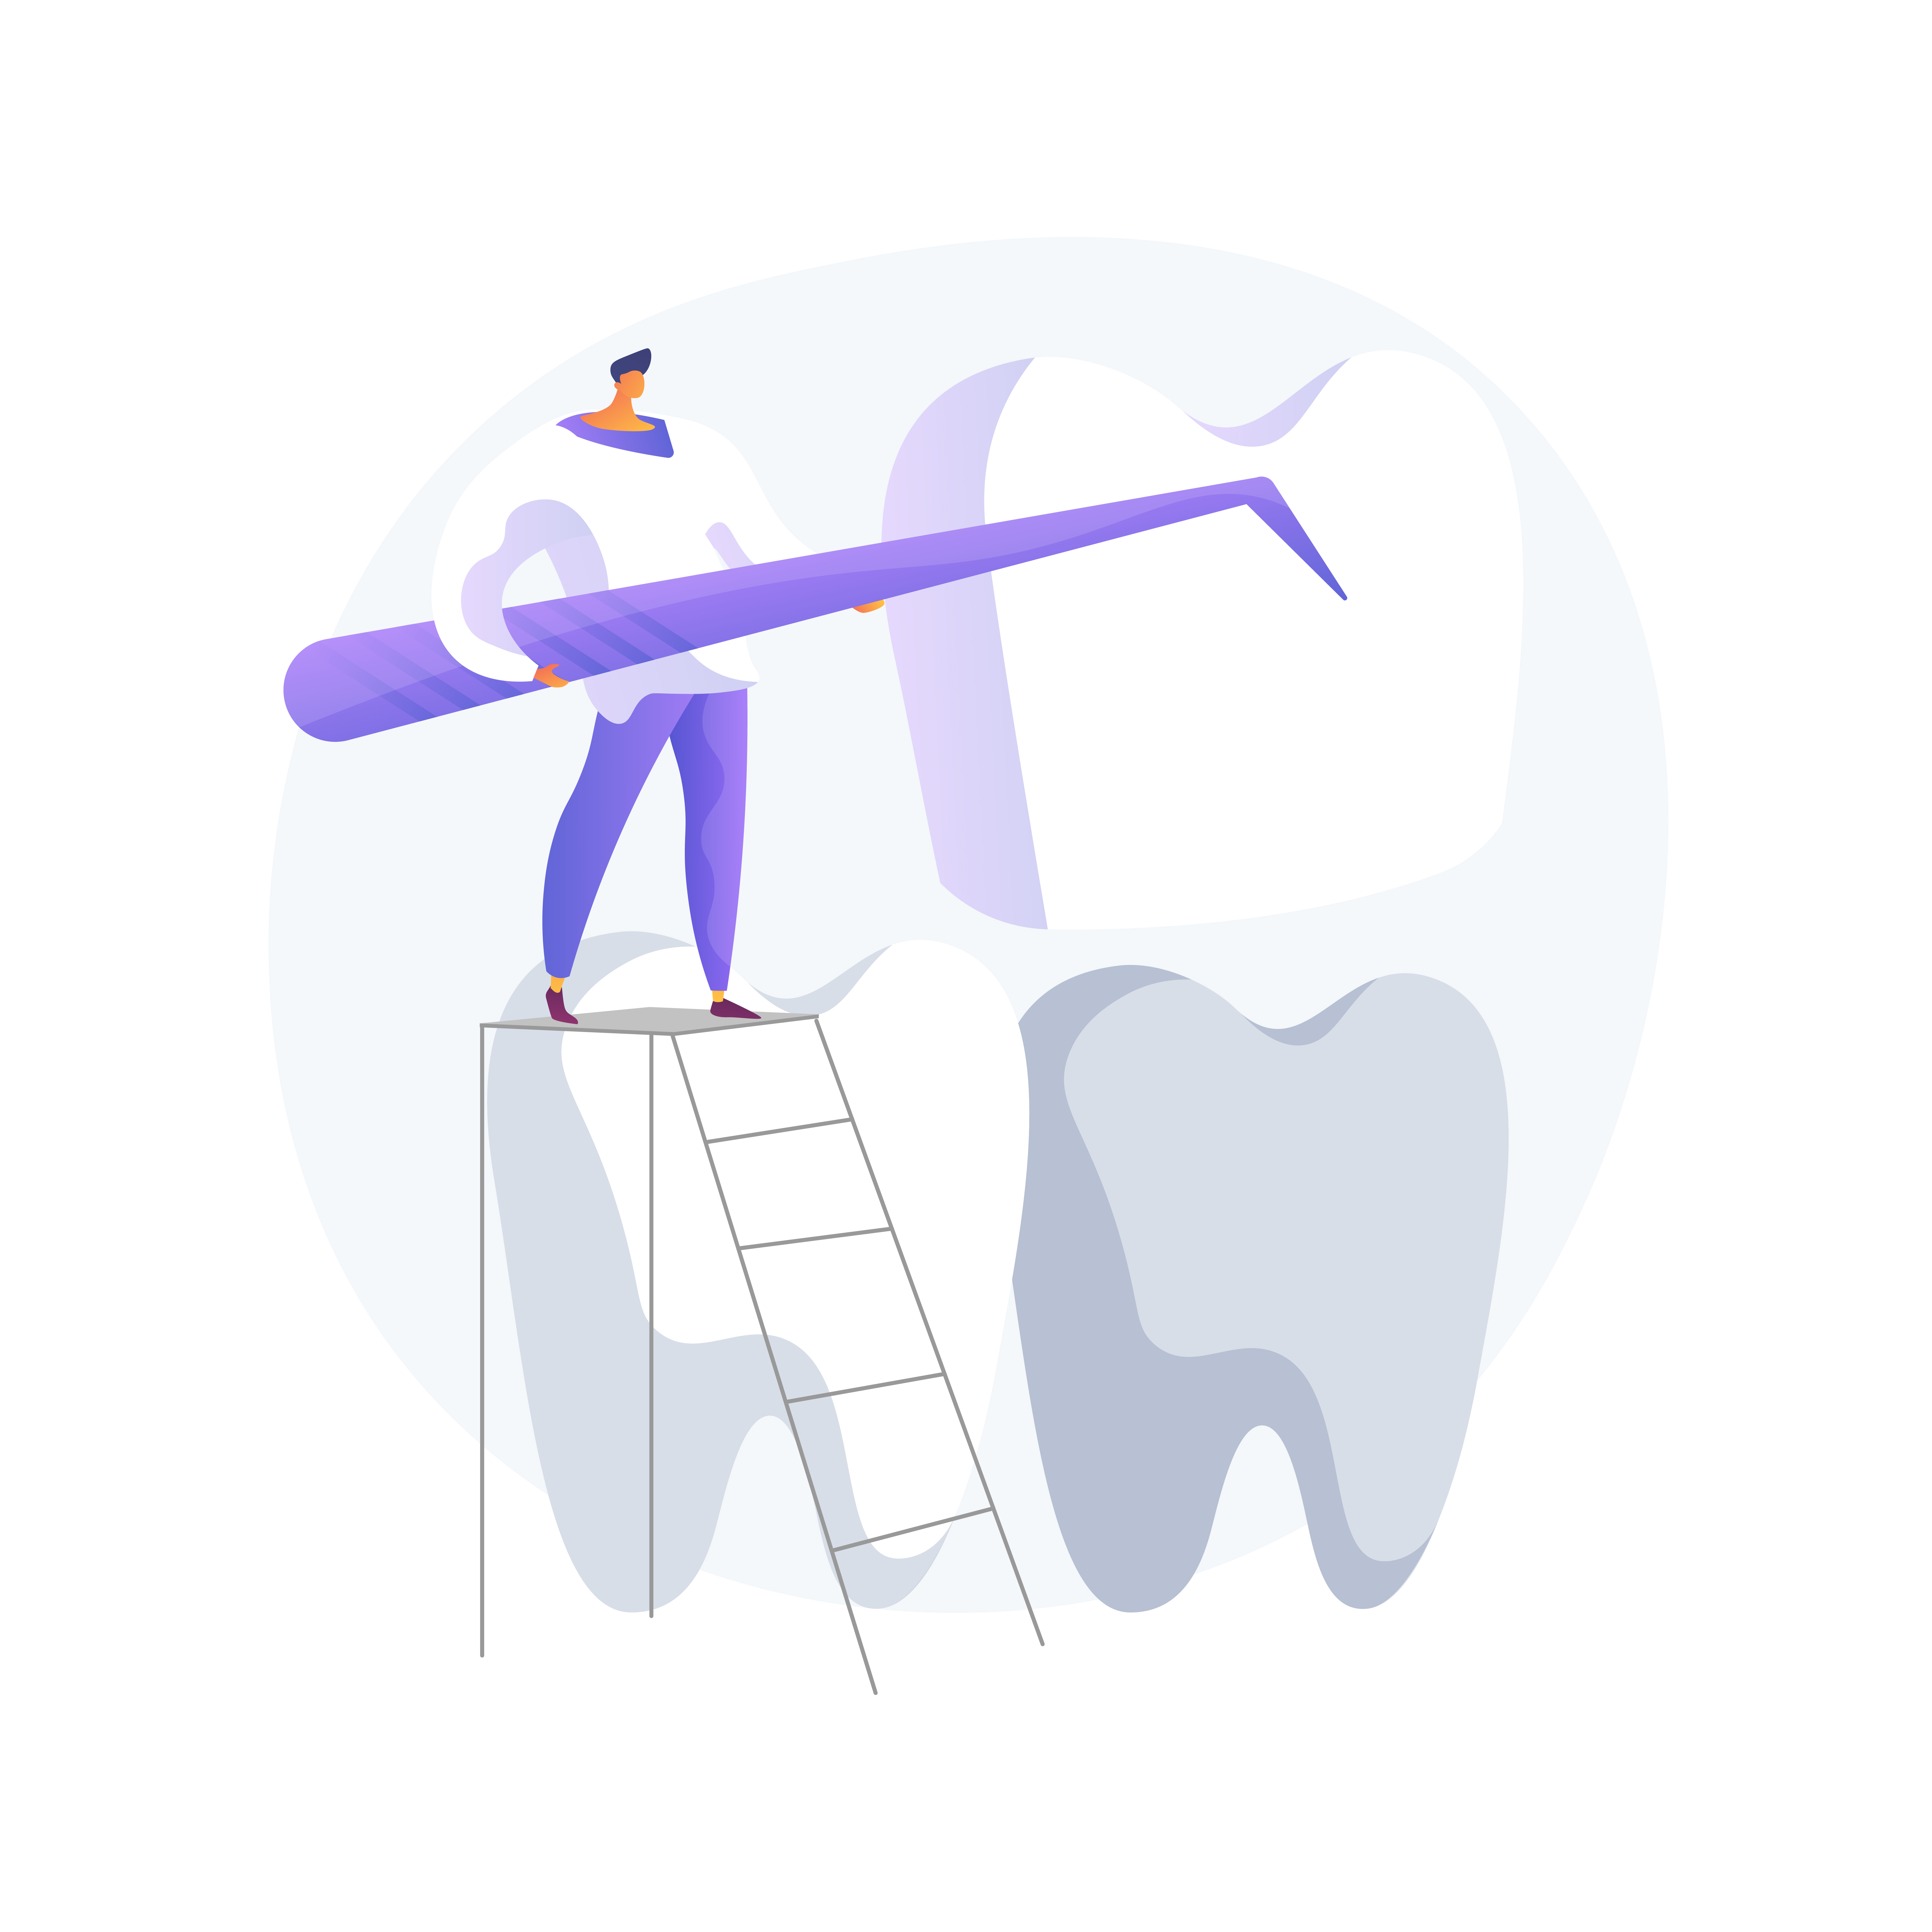 stylized illustration of a small man, dressed in purple clothing and a
              helmet, who is standing on a ladder leaning against a large tooth.
              The man is using a giant dental cleaning tool to clean the tooth. The
              image has an artistic and colorful style, and appears to have an
              educational or informational purpose about dental care.